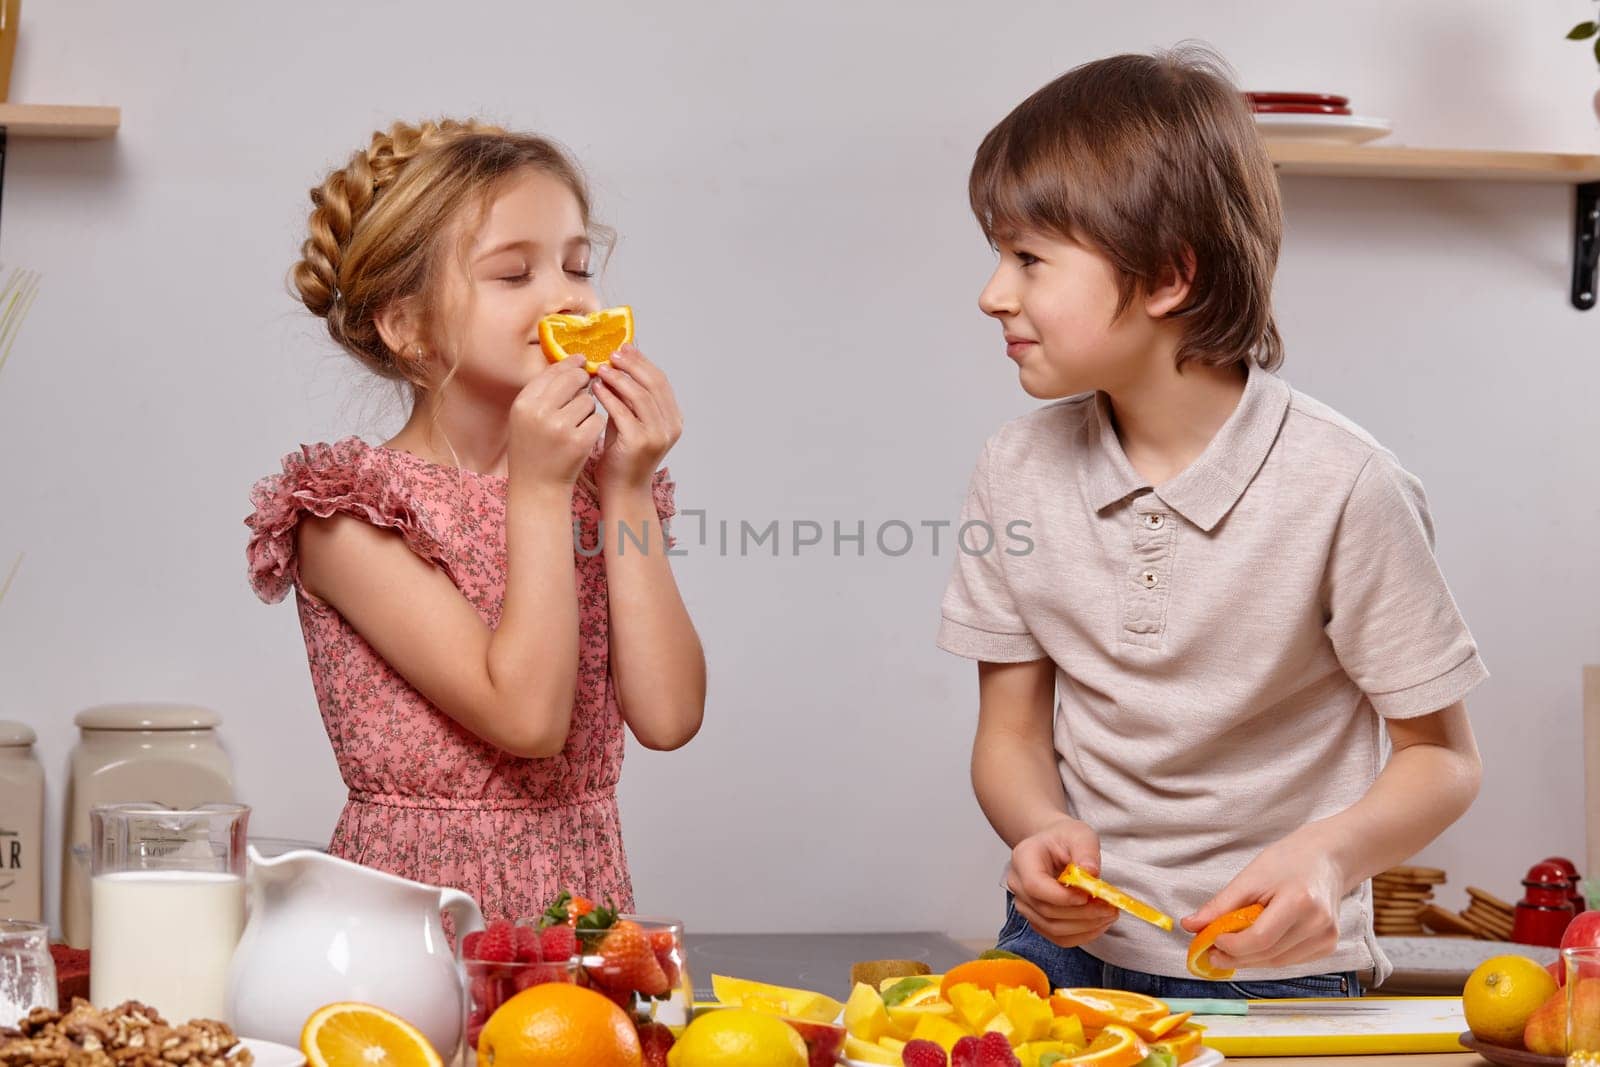 Cute cook couple. Handsome boy with brown hair dressed in a light t-shirt and jeans with a pretty little girl dressed in a pink dress with a braid in her hairstyle are at a kitchen against a white wall with shelves on it. Girl is smelling an orange and boy is looking at her.